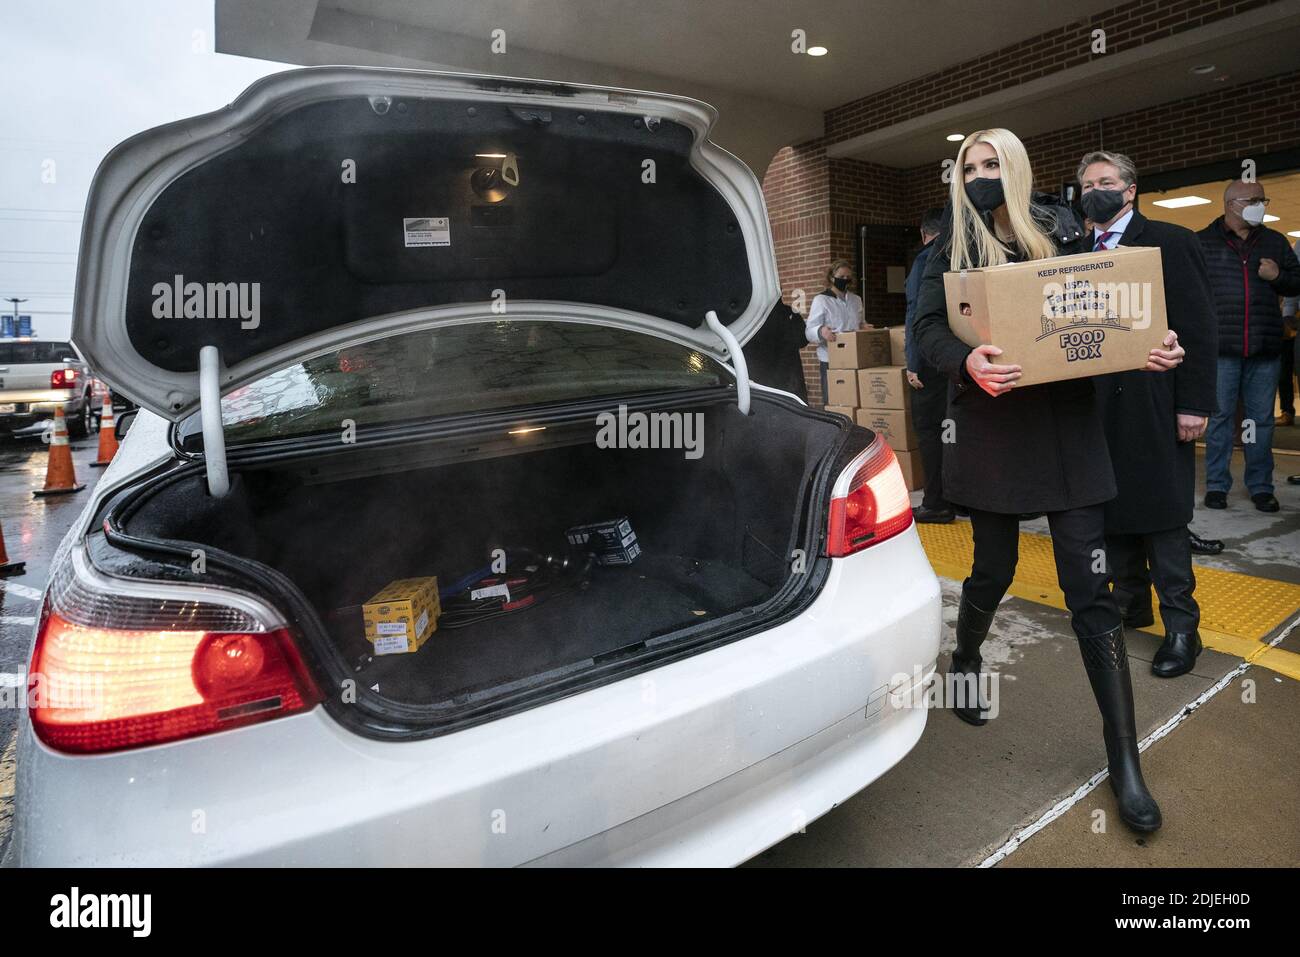 Washington, United States. 14th Dec, 2020. Ivanka Trump, White House advisor and daughter of President Donald Trump, helps to distribute food boxes to needy families at Christ Chapel in Woodbridge, Virginia on Monday, December 14, 2020. Photo by Kevin Dietsch/UPI Credit: UPI/Alamy Live News Stock Photo